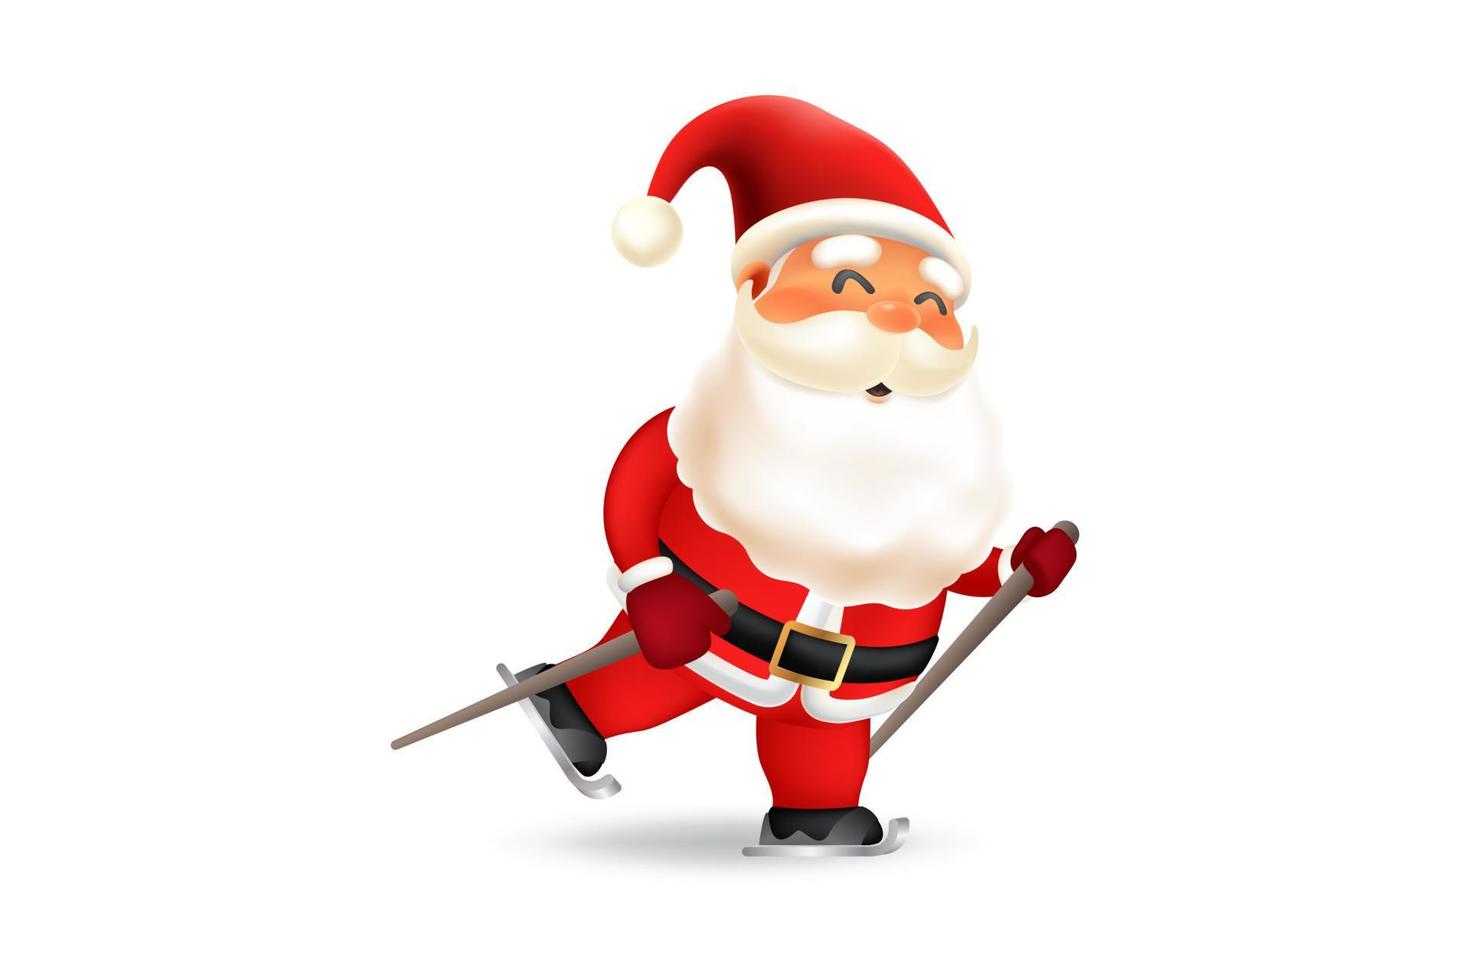 Santa Claus ice skiing 3D vector illustration. Merry Christmas and Happy New Year